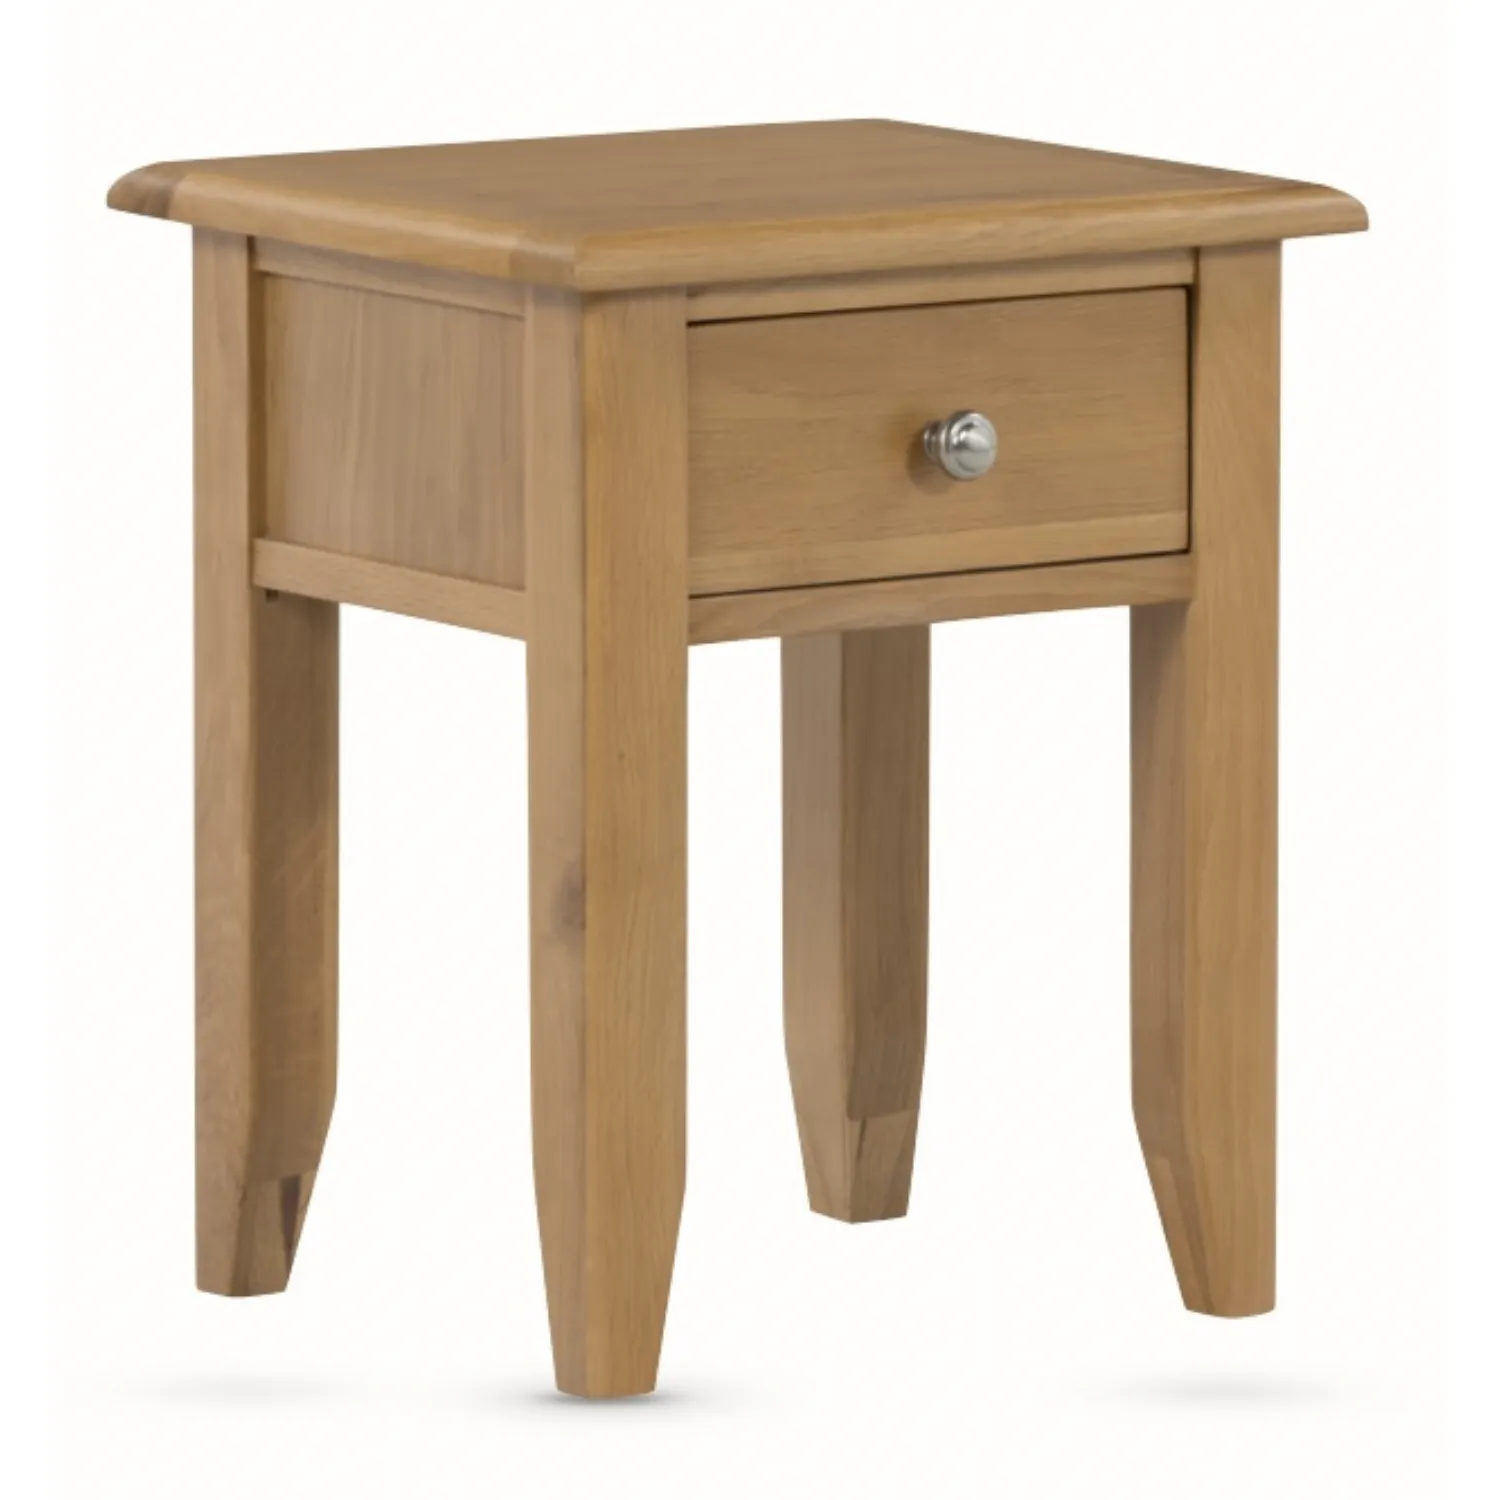 Medium Solid Oak Lamp Table with Drawer